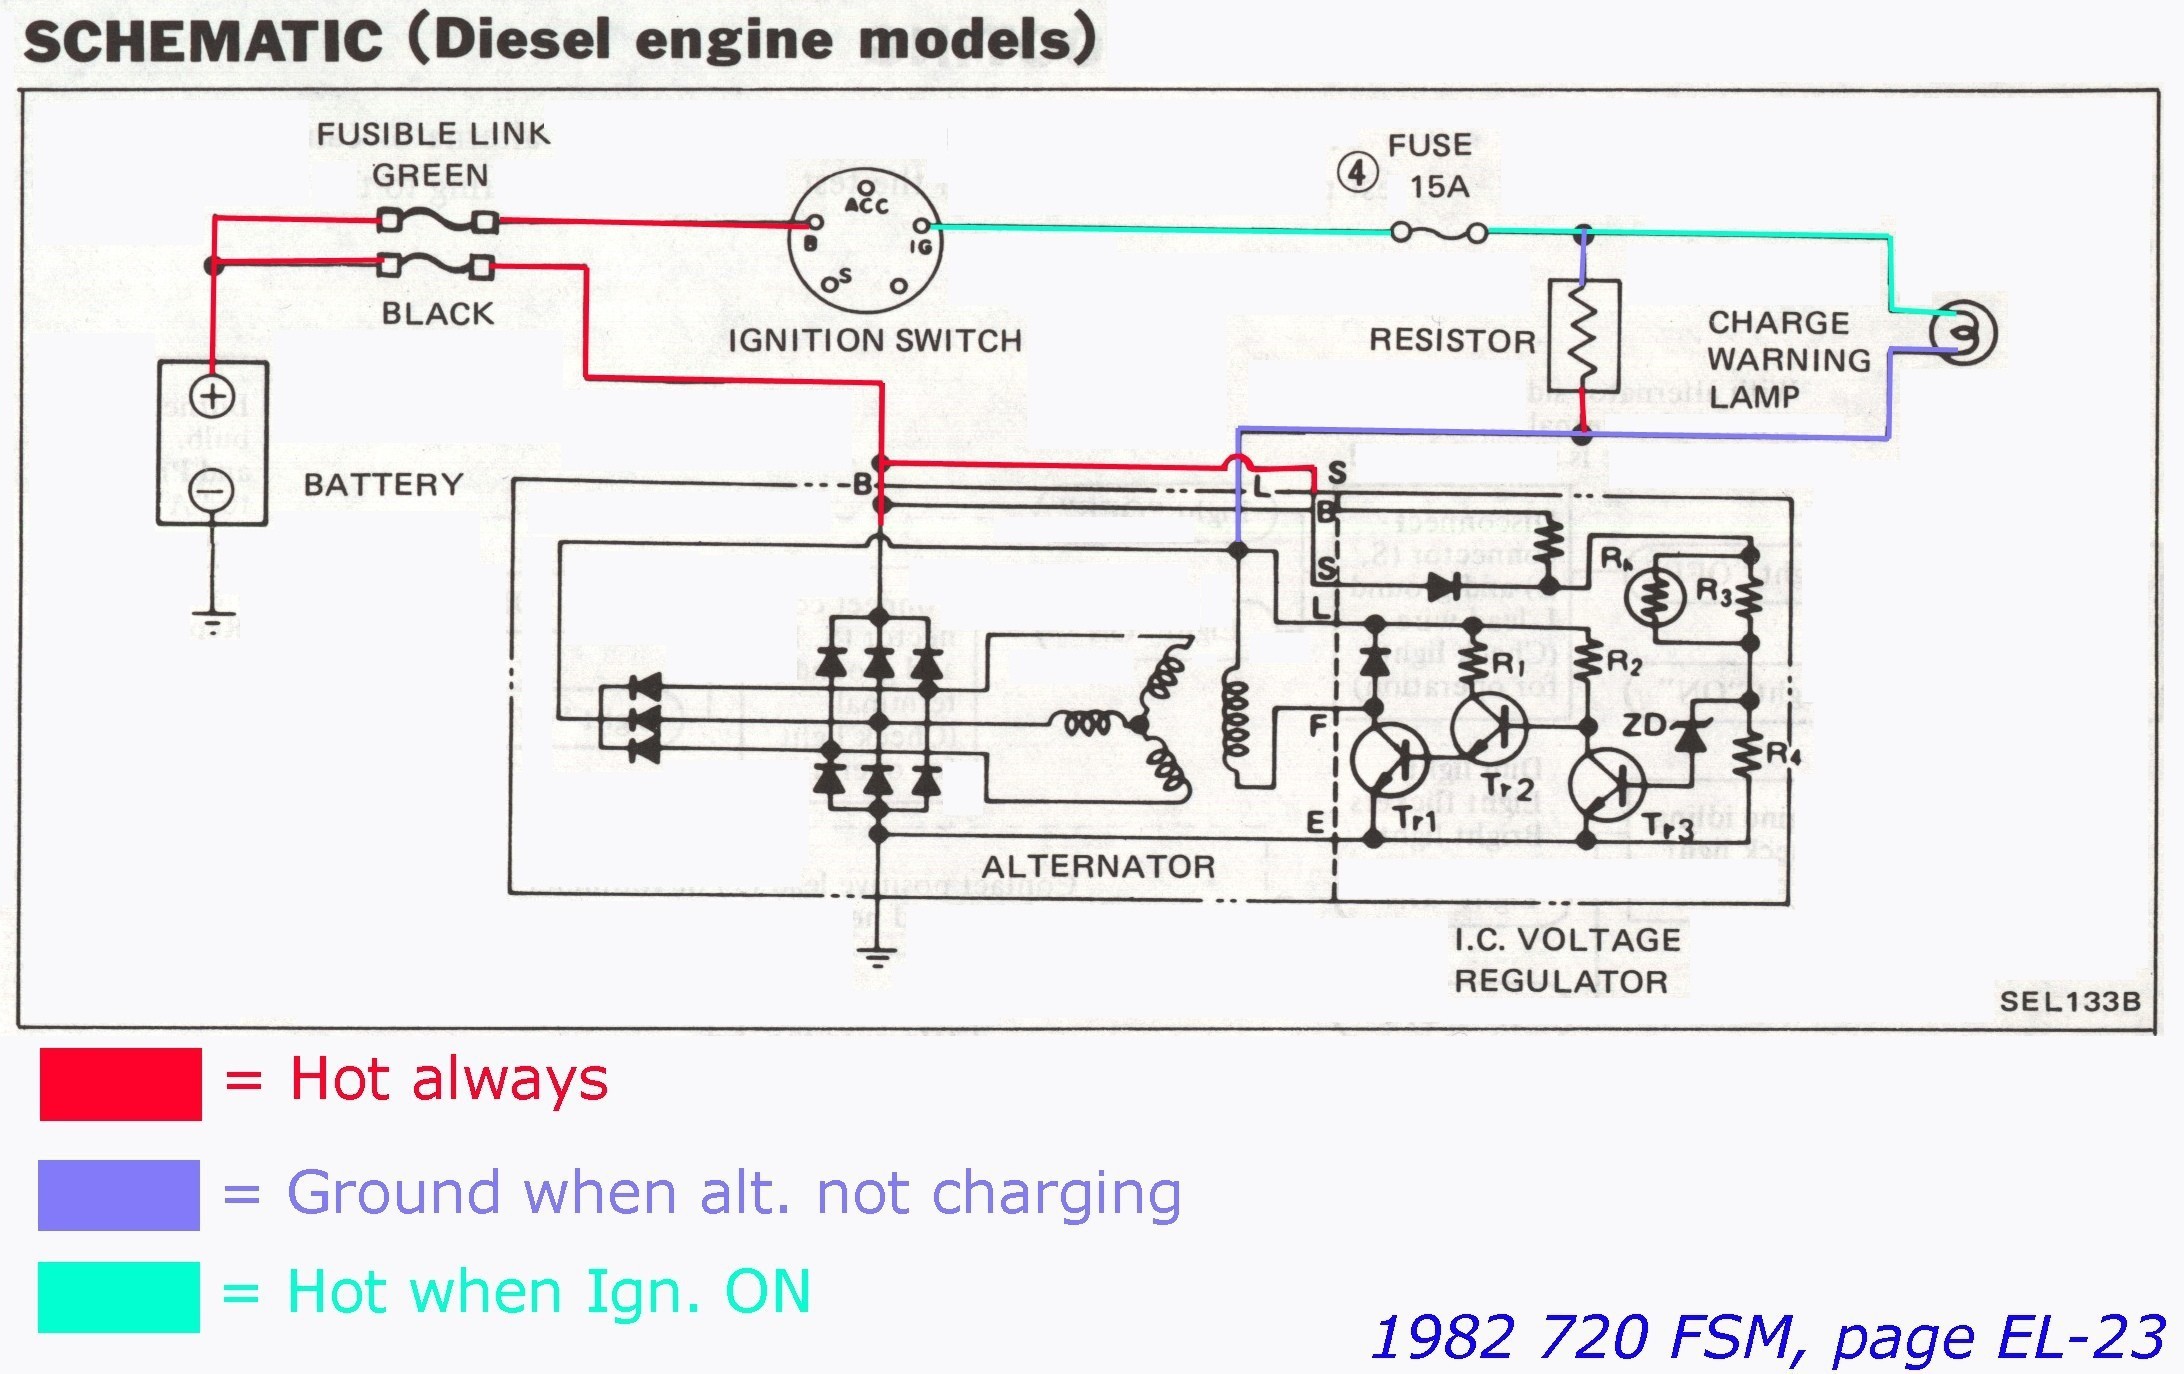 Wiring Diagram for 1 Wire Gm Alternator Refrence 2 Wire Alternator Wiring Diagram Awesome 3 Wire